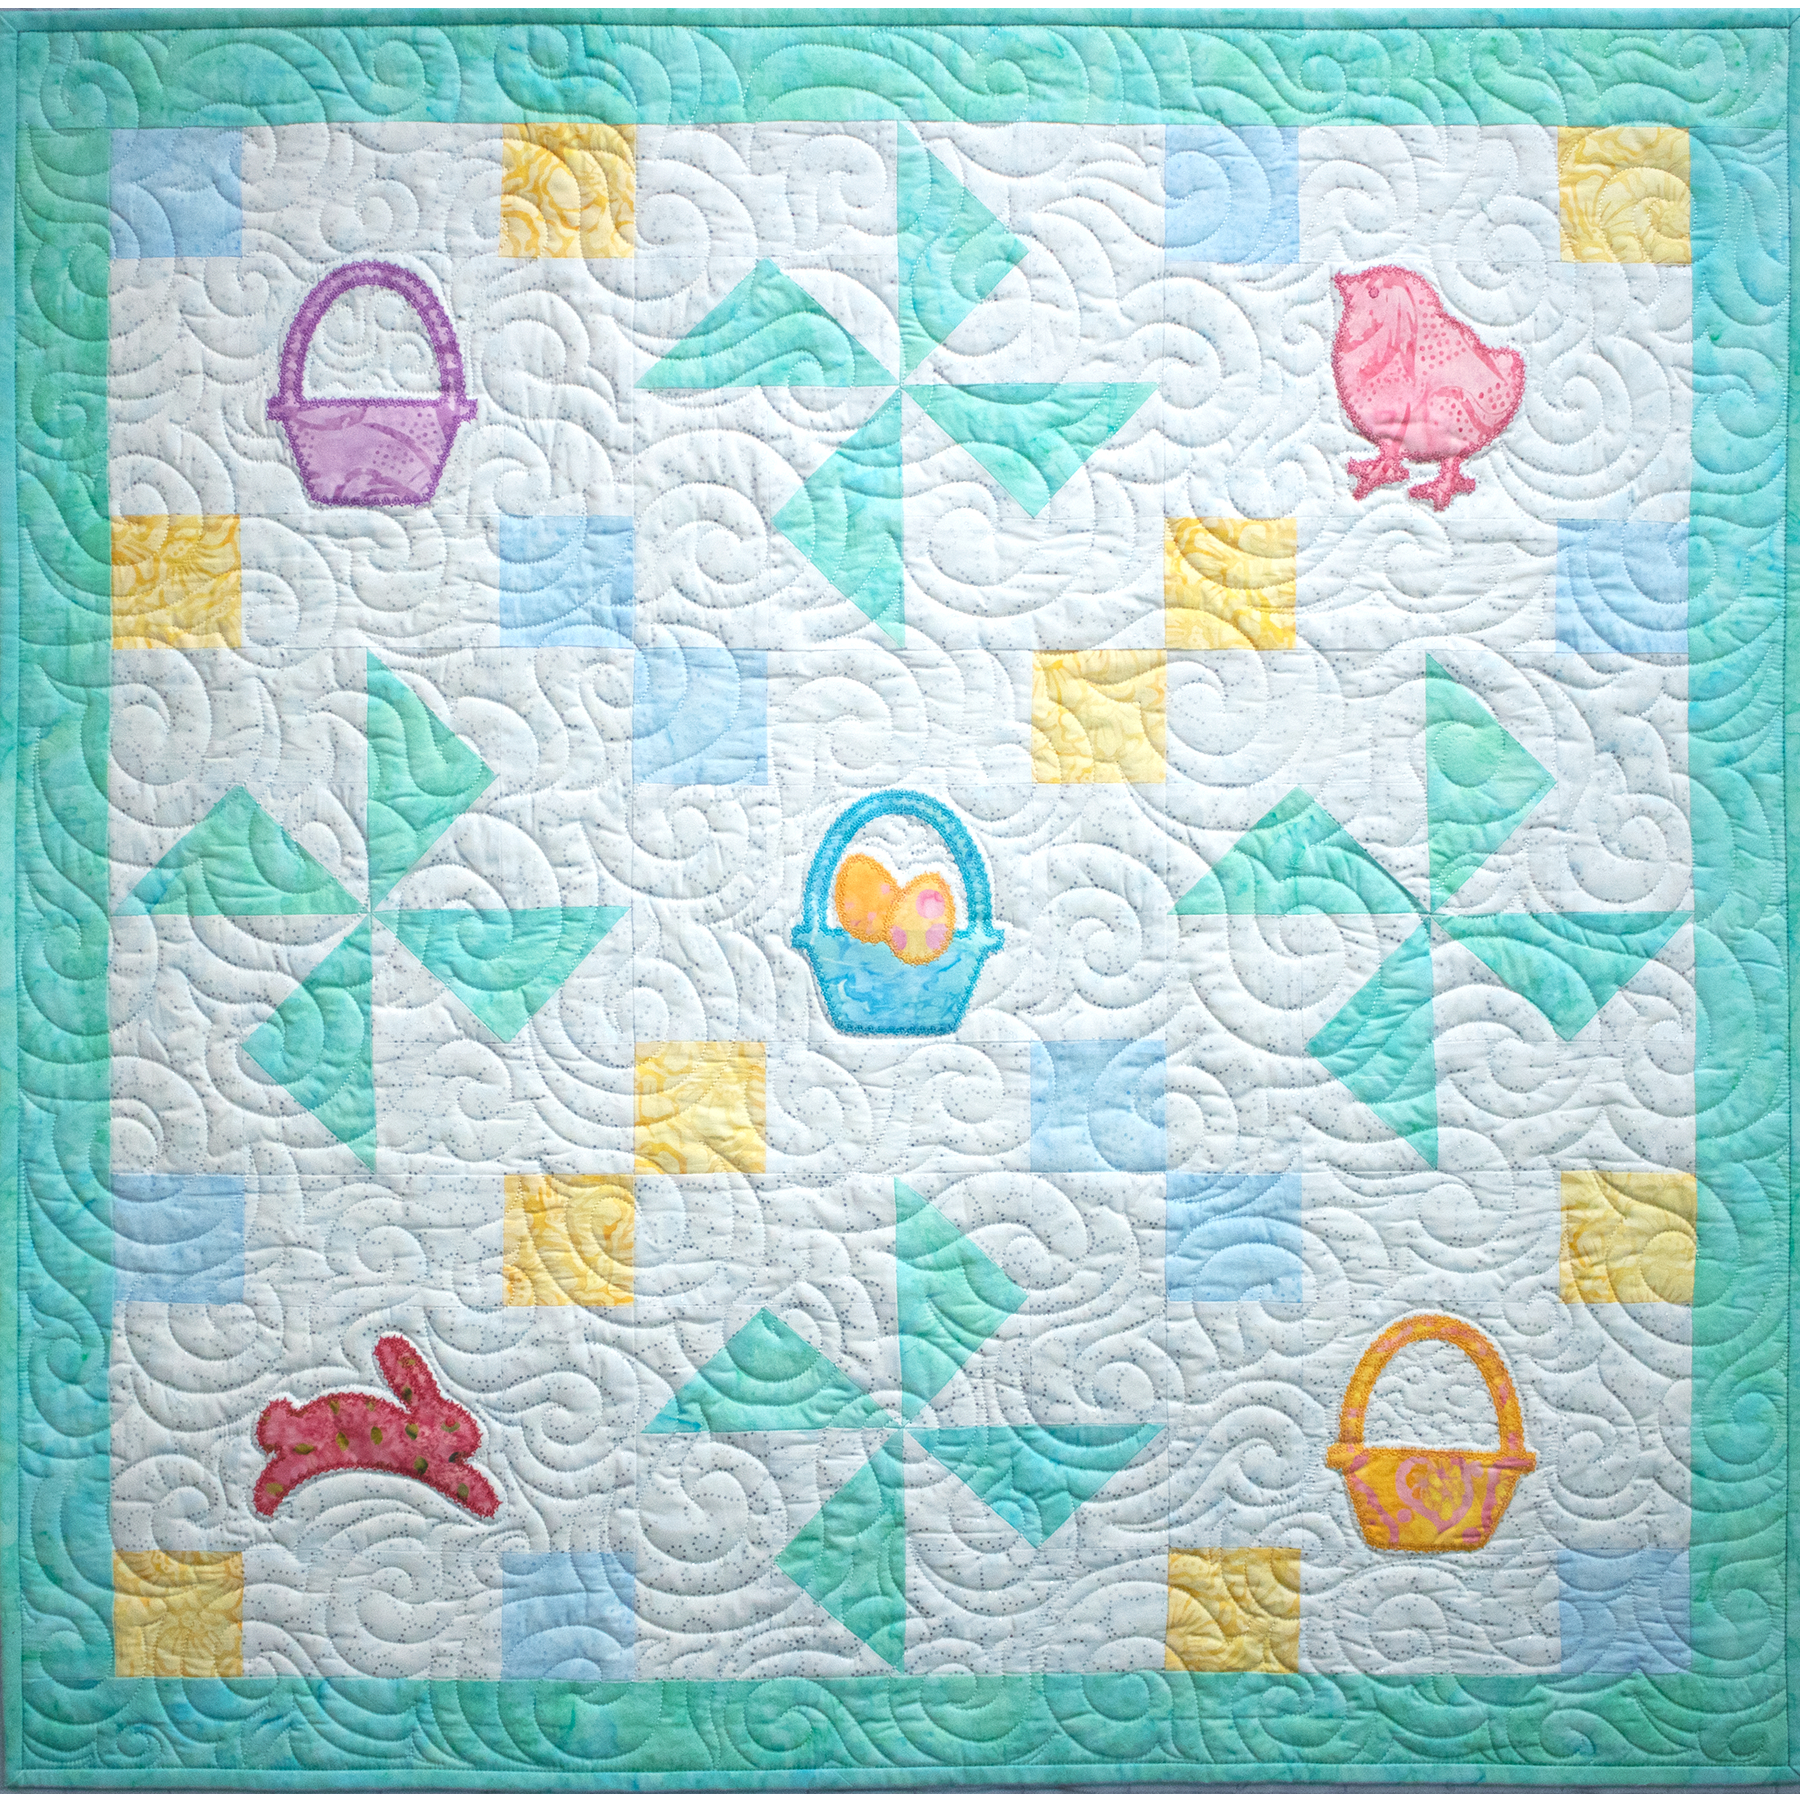 Baby Quilt Embroidery Patterns See How Embroidery Makes This Spring Medley Ba Quilt So Adorable